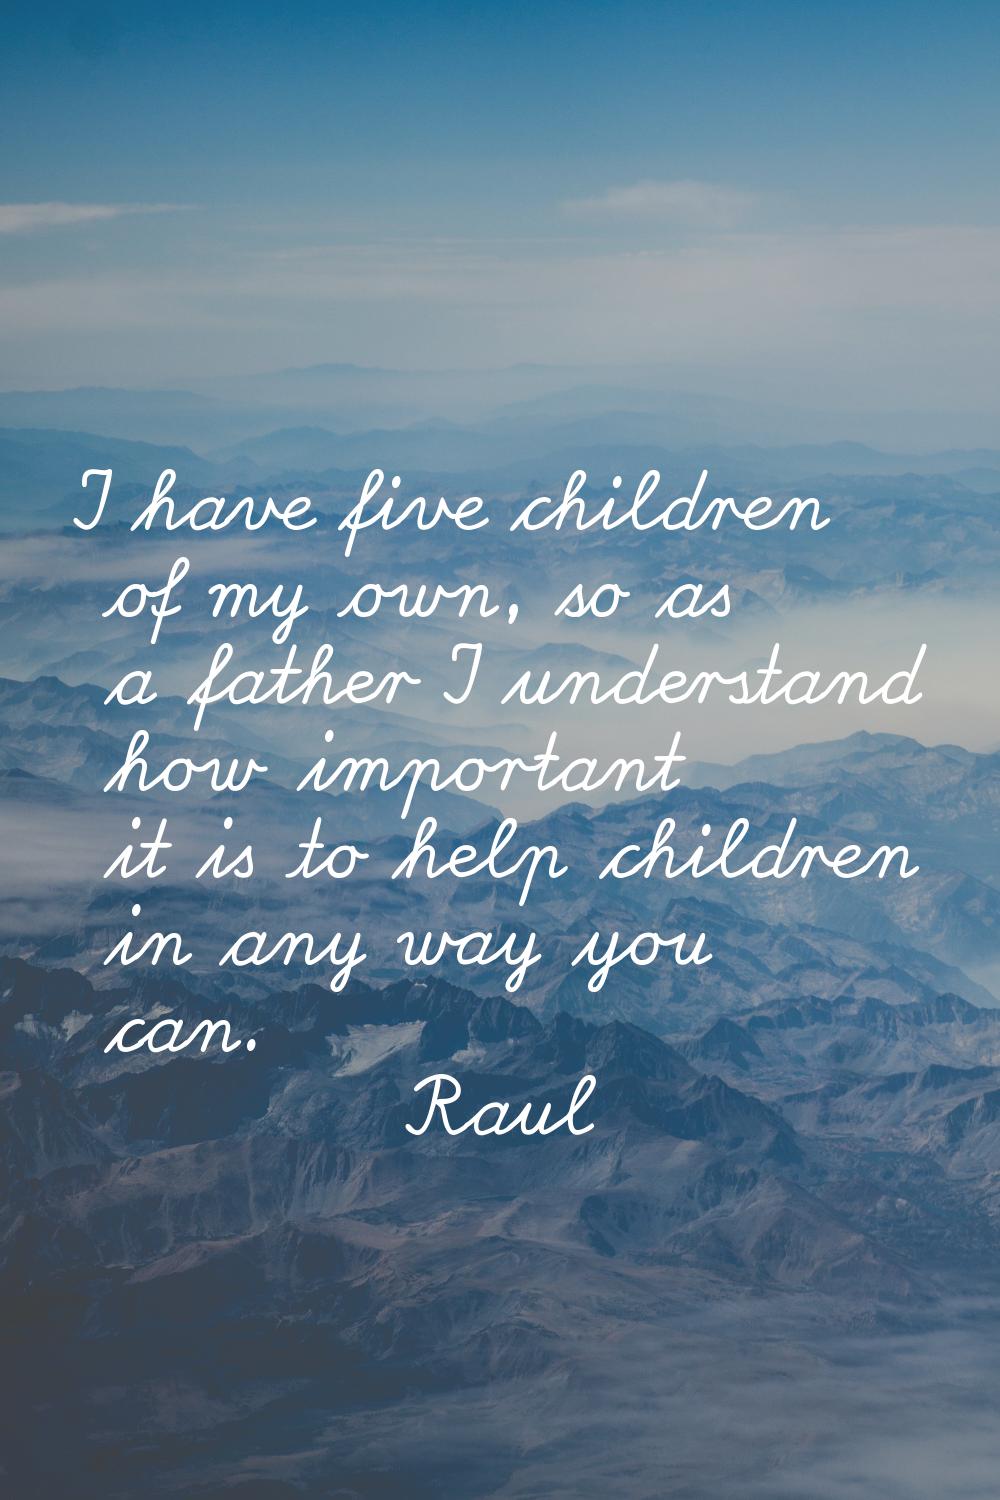 I have five children of my own, so as a father I understand how important it is to help children in